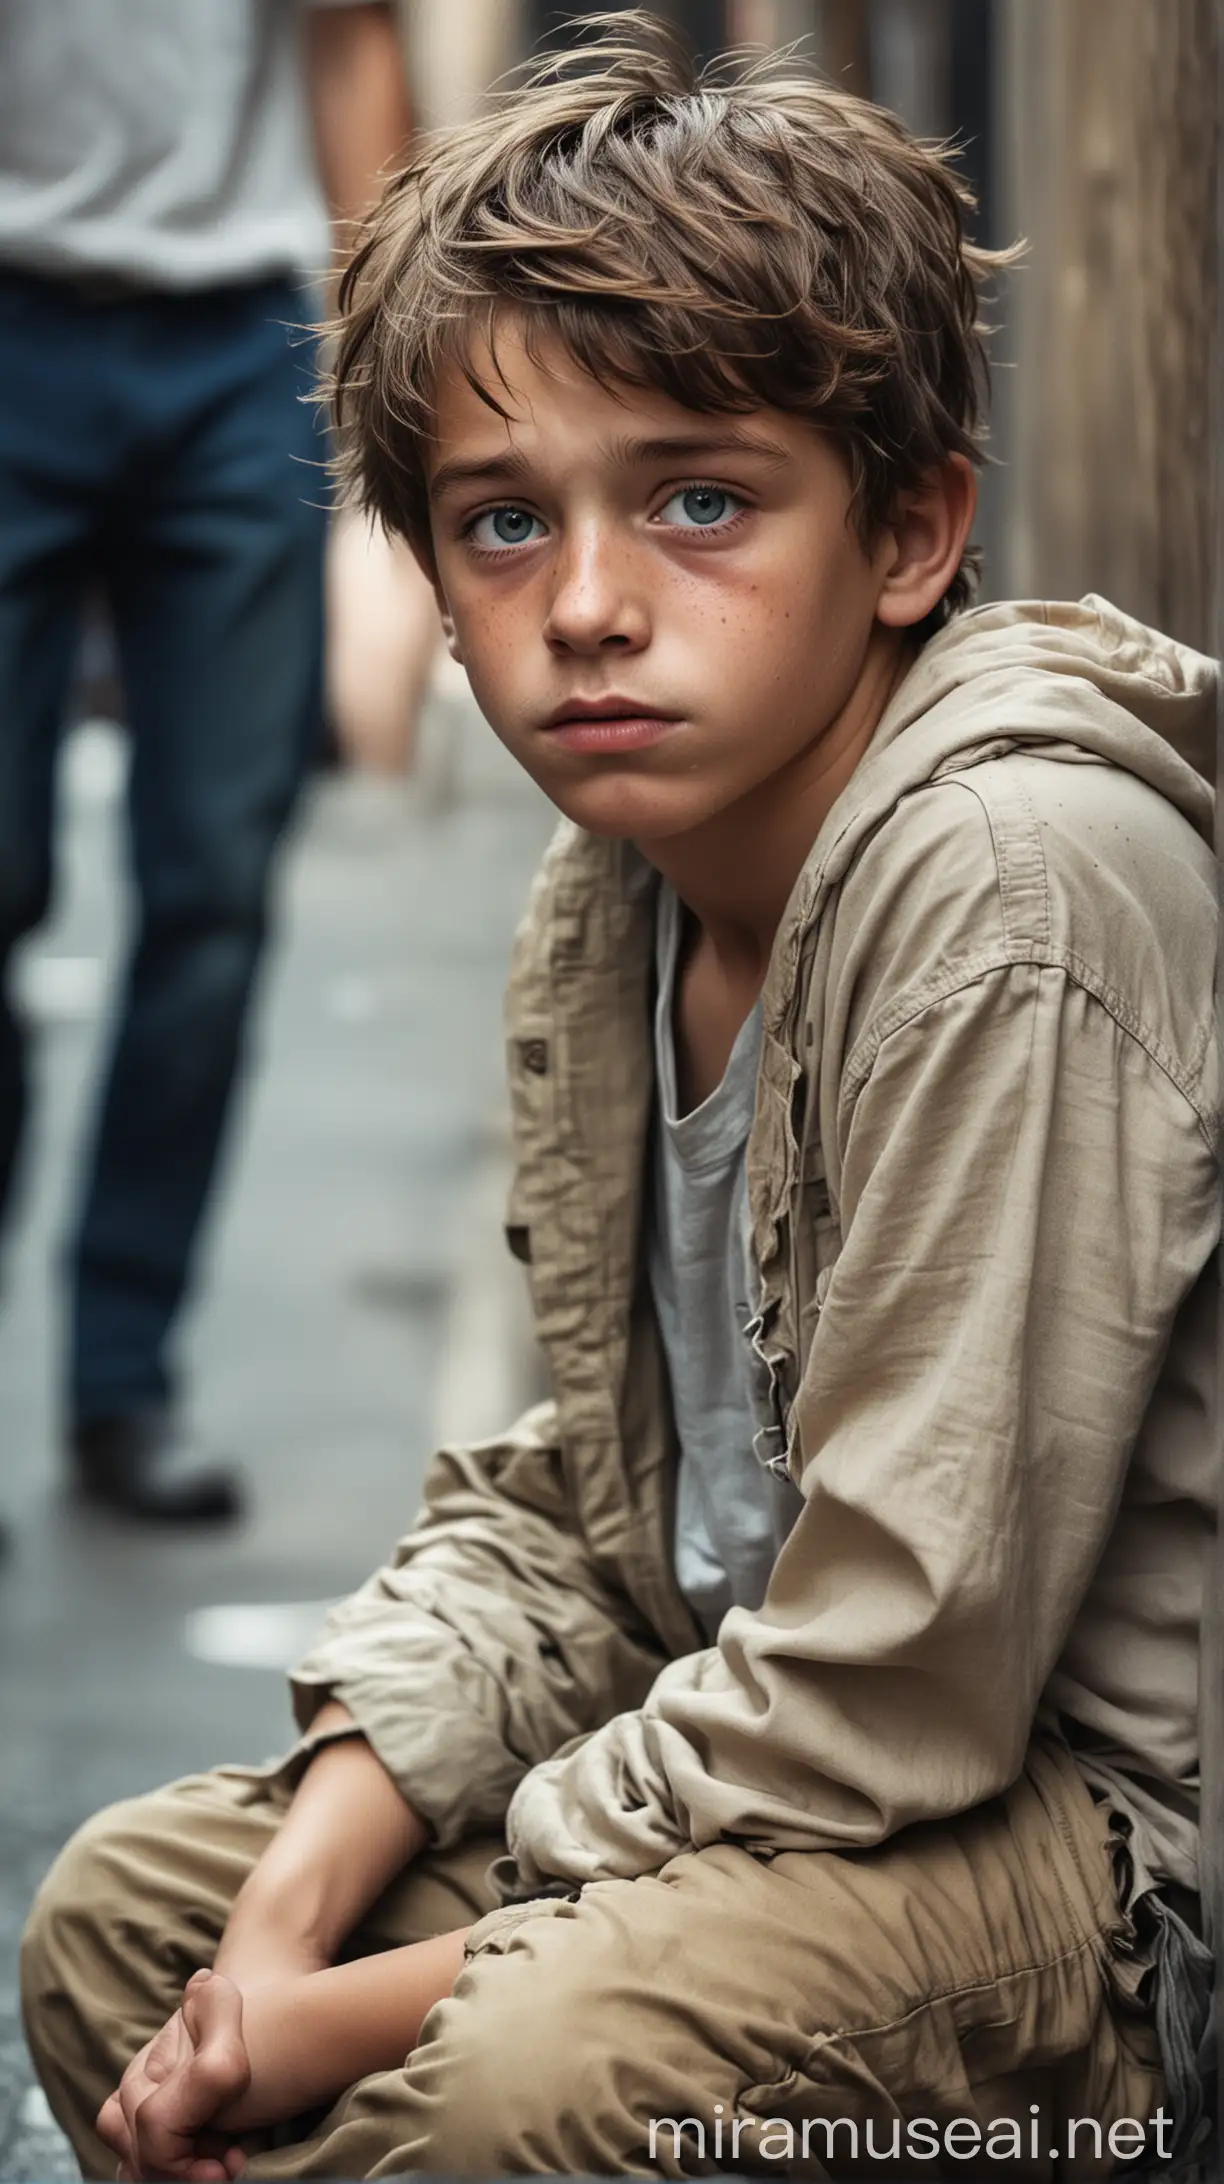 In the image, a homeless British boy sits in the middle of a bustling city street, capturing 60% of the frame. The boy, around 18 years old, has disheveled brown hair and a pale, weathered face. His blue eyes, dull and ringed with dark circles, stare hopelessly ahead. His cheeks are gaunt, and his chapped lips are slightly parted in a silent plea. He wears a worn-out white t-shirt and beige cargo pants, his posture slumped and defeated.

Around him, the city continues its daily rush, indifferent to his plight. People walk by hurriedly, cars pass, and the noise of the busy street contrasts sharply with the boy's silent despair. The background is filled with blurred motion, emphasizing the boy's isolation amidst the city's chaos. The image powerfully captures his hopelessness and the stark reality of his situation.






